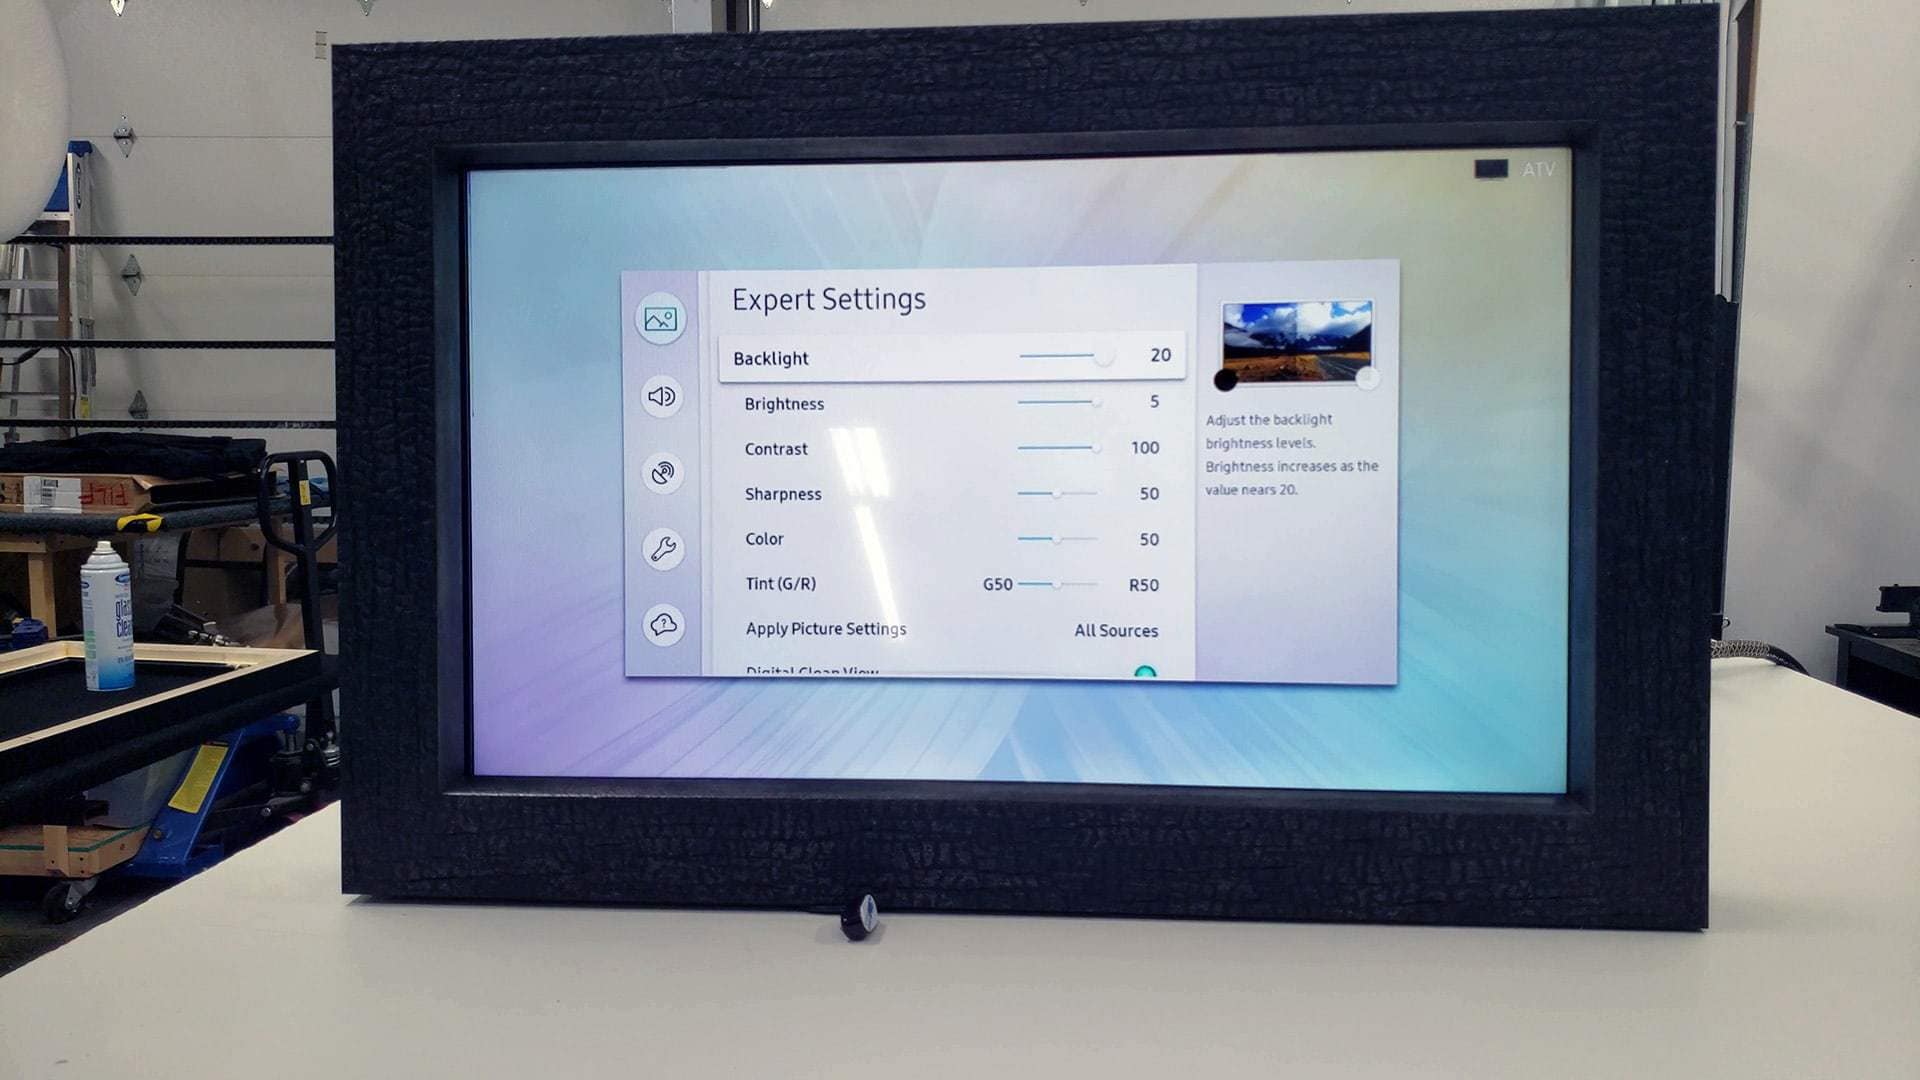 How To Make A Mirror Tv Step By, Flat Screen Tv That Turns Into A Mirror